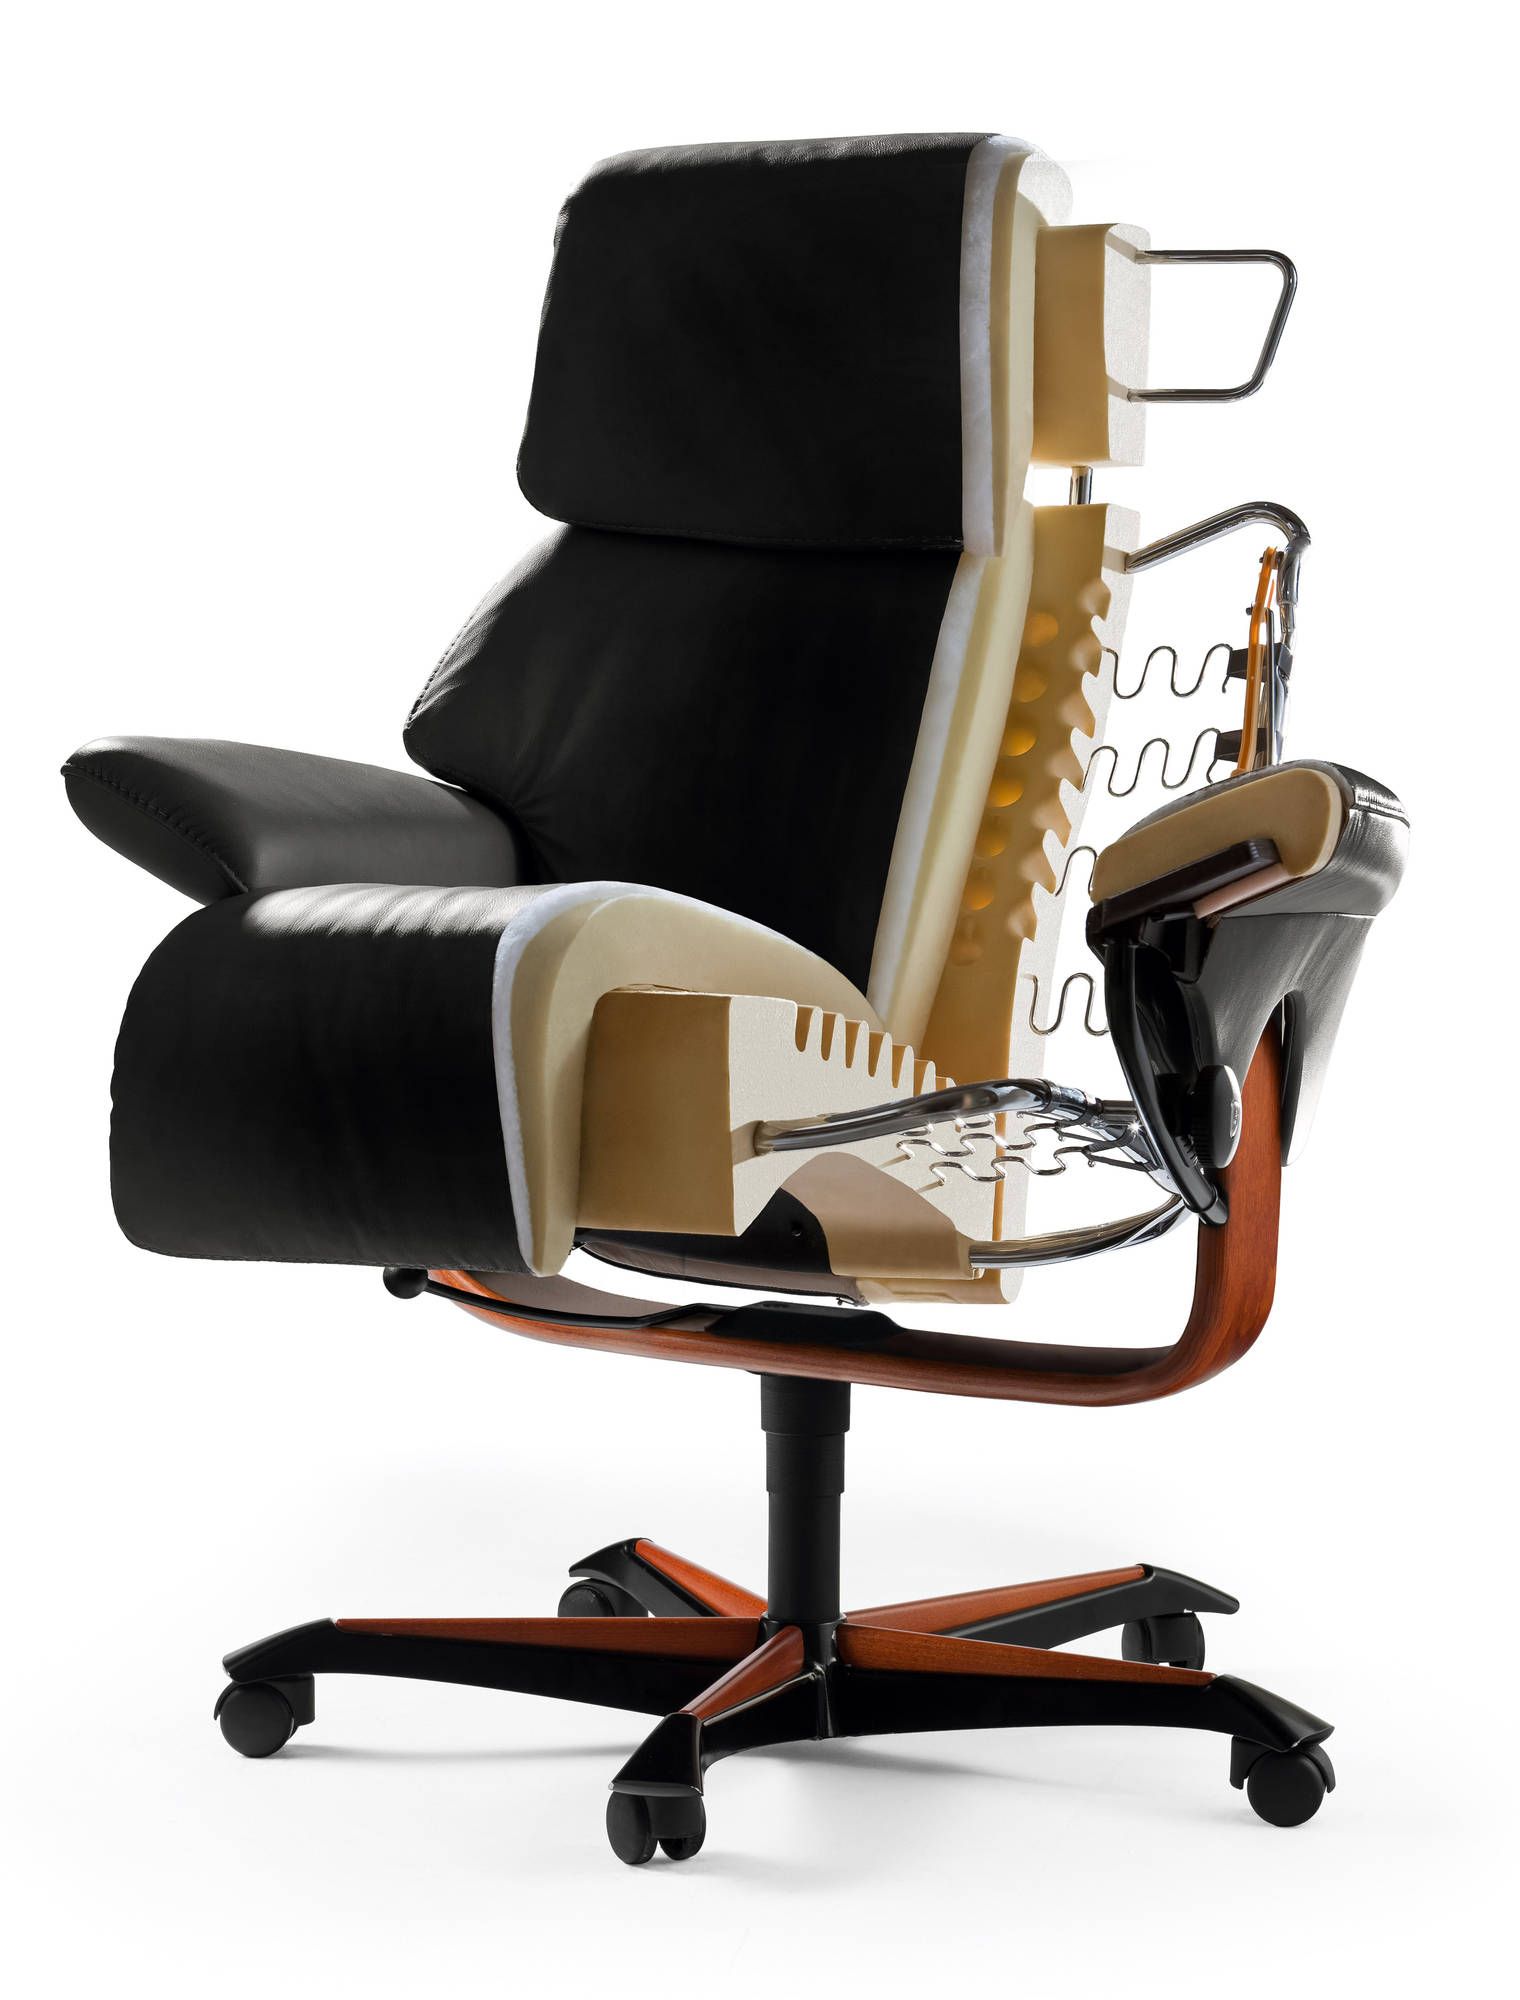 Ekornes Stressless Magic Office Chair | Luxury On Wheels For Kawai Leather Swivel Chairs (View 10 of 20)